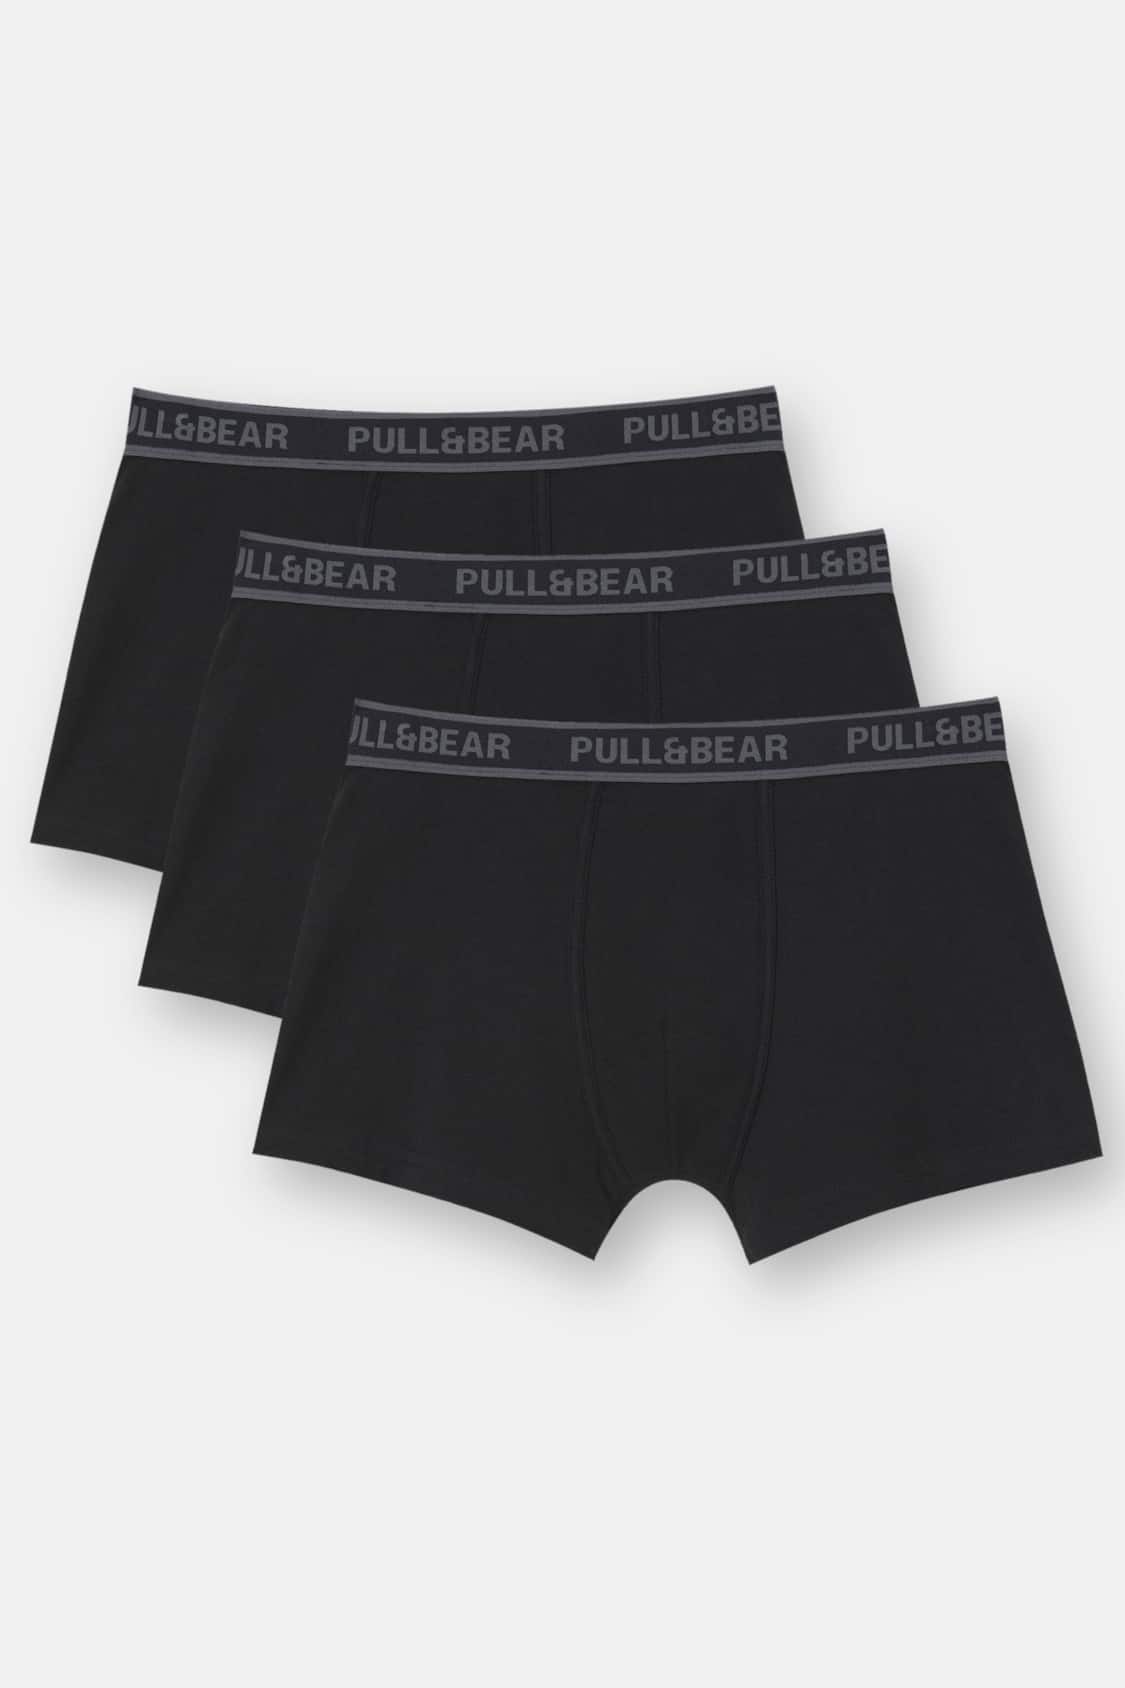 Pack of 3 pairs of black boxers with stripes - PULL&BEAR